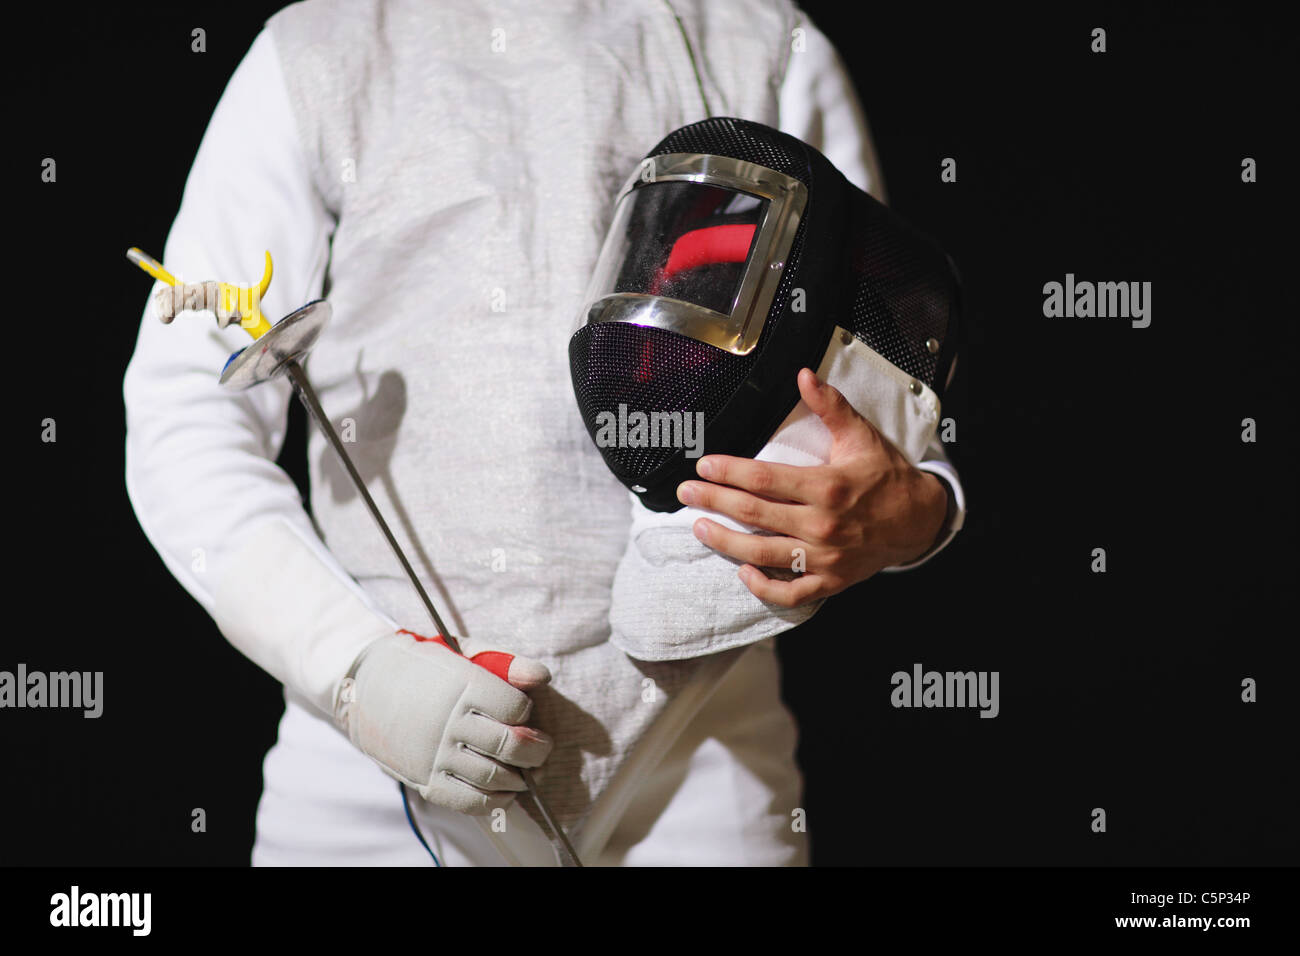 Fencing mask and Foil Stock Photo